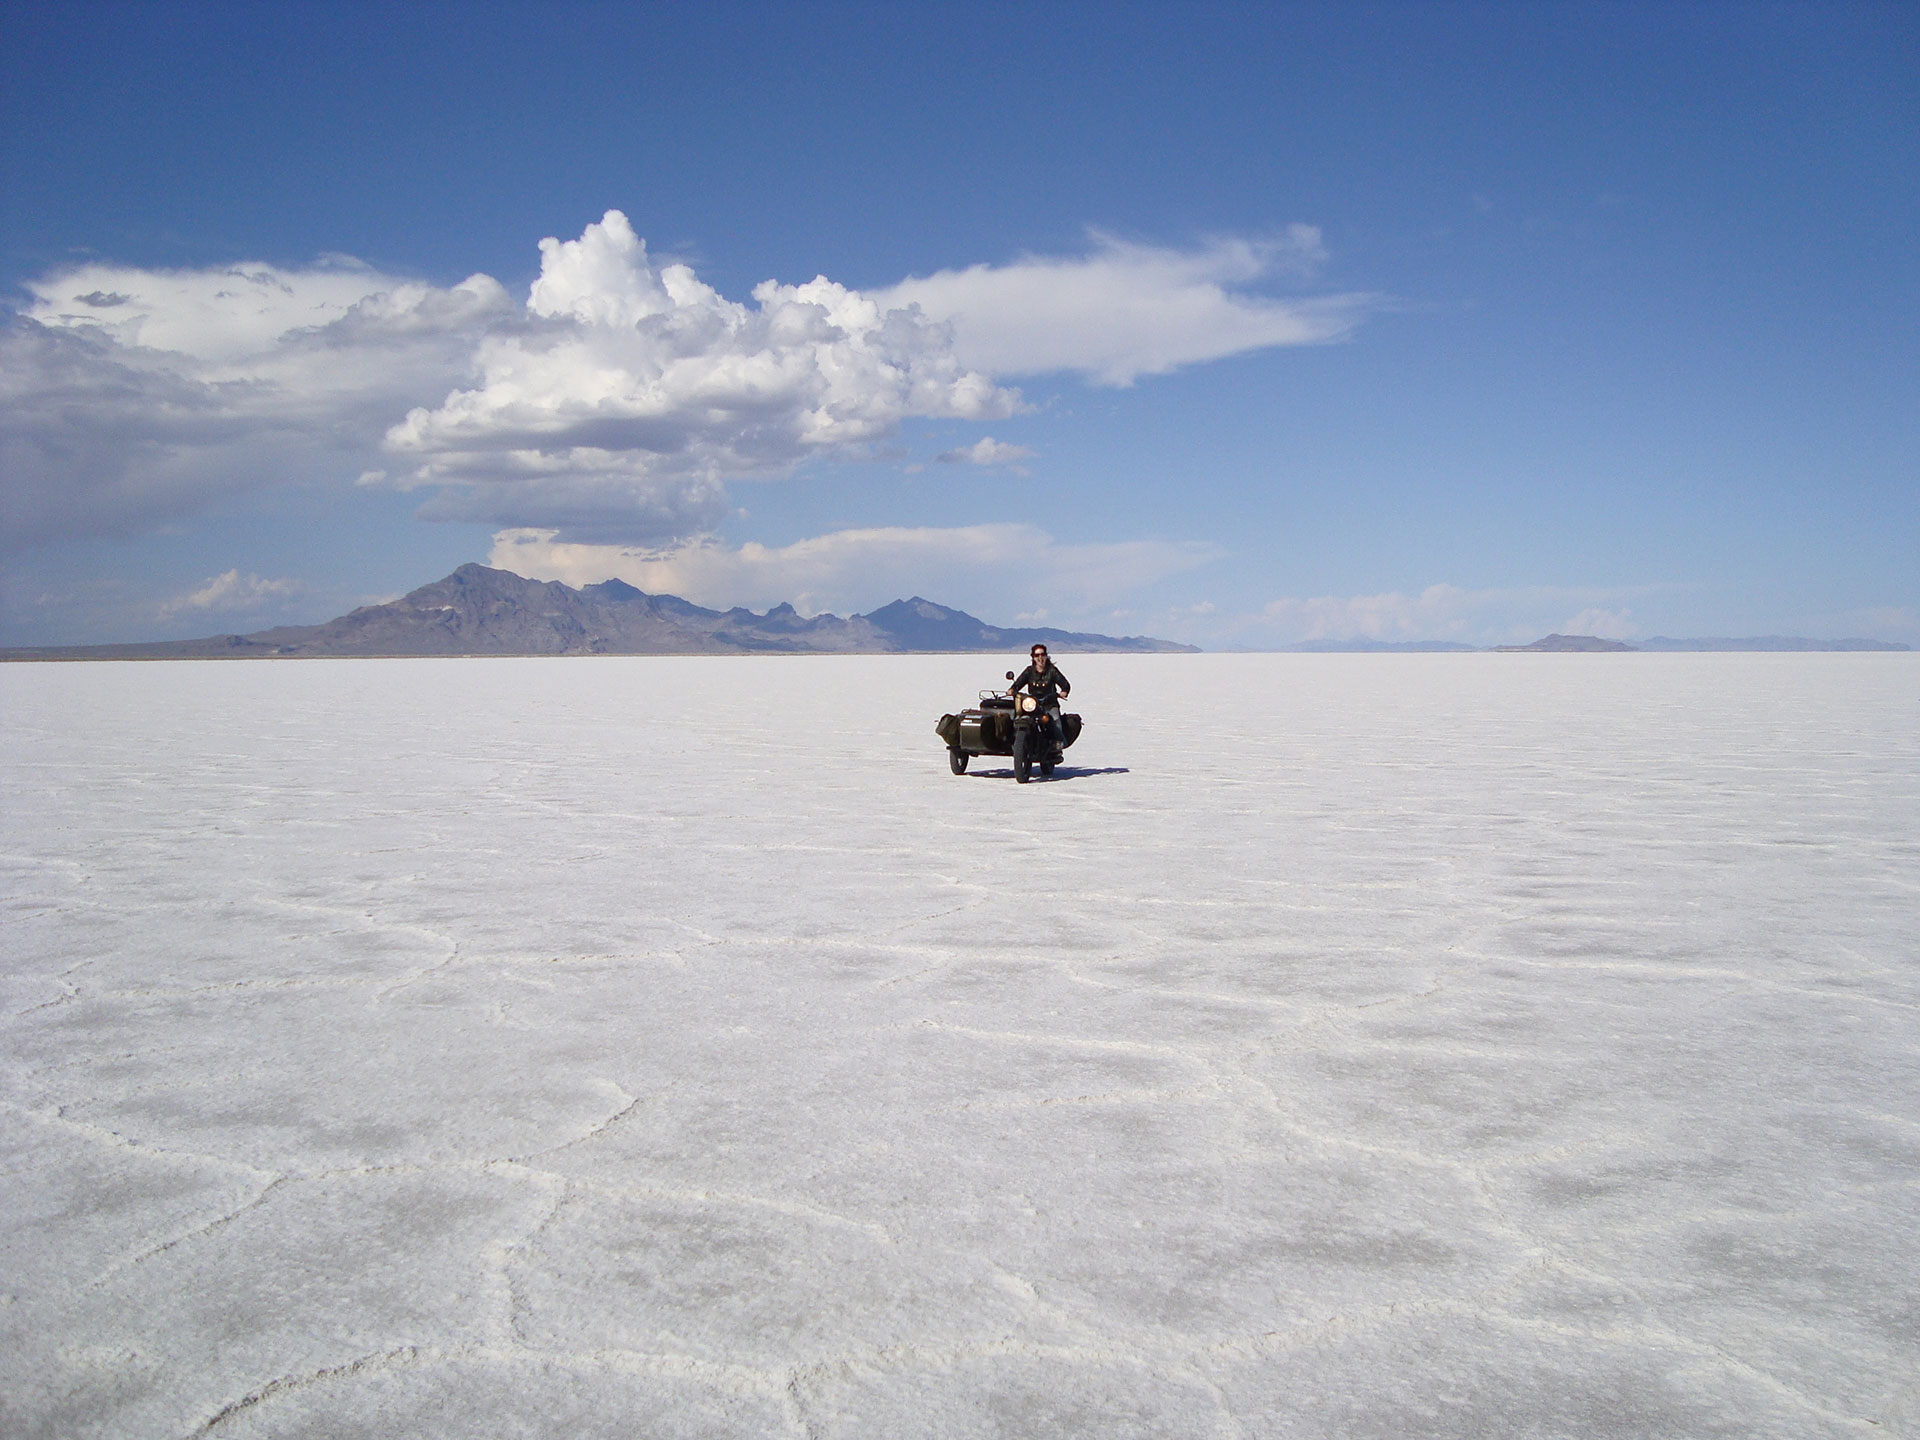 Adventure speaker Lois Pryce riding across the Bonneville salt flats with a motorbike and sidecar